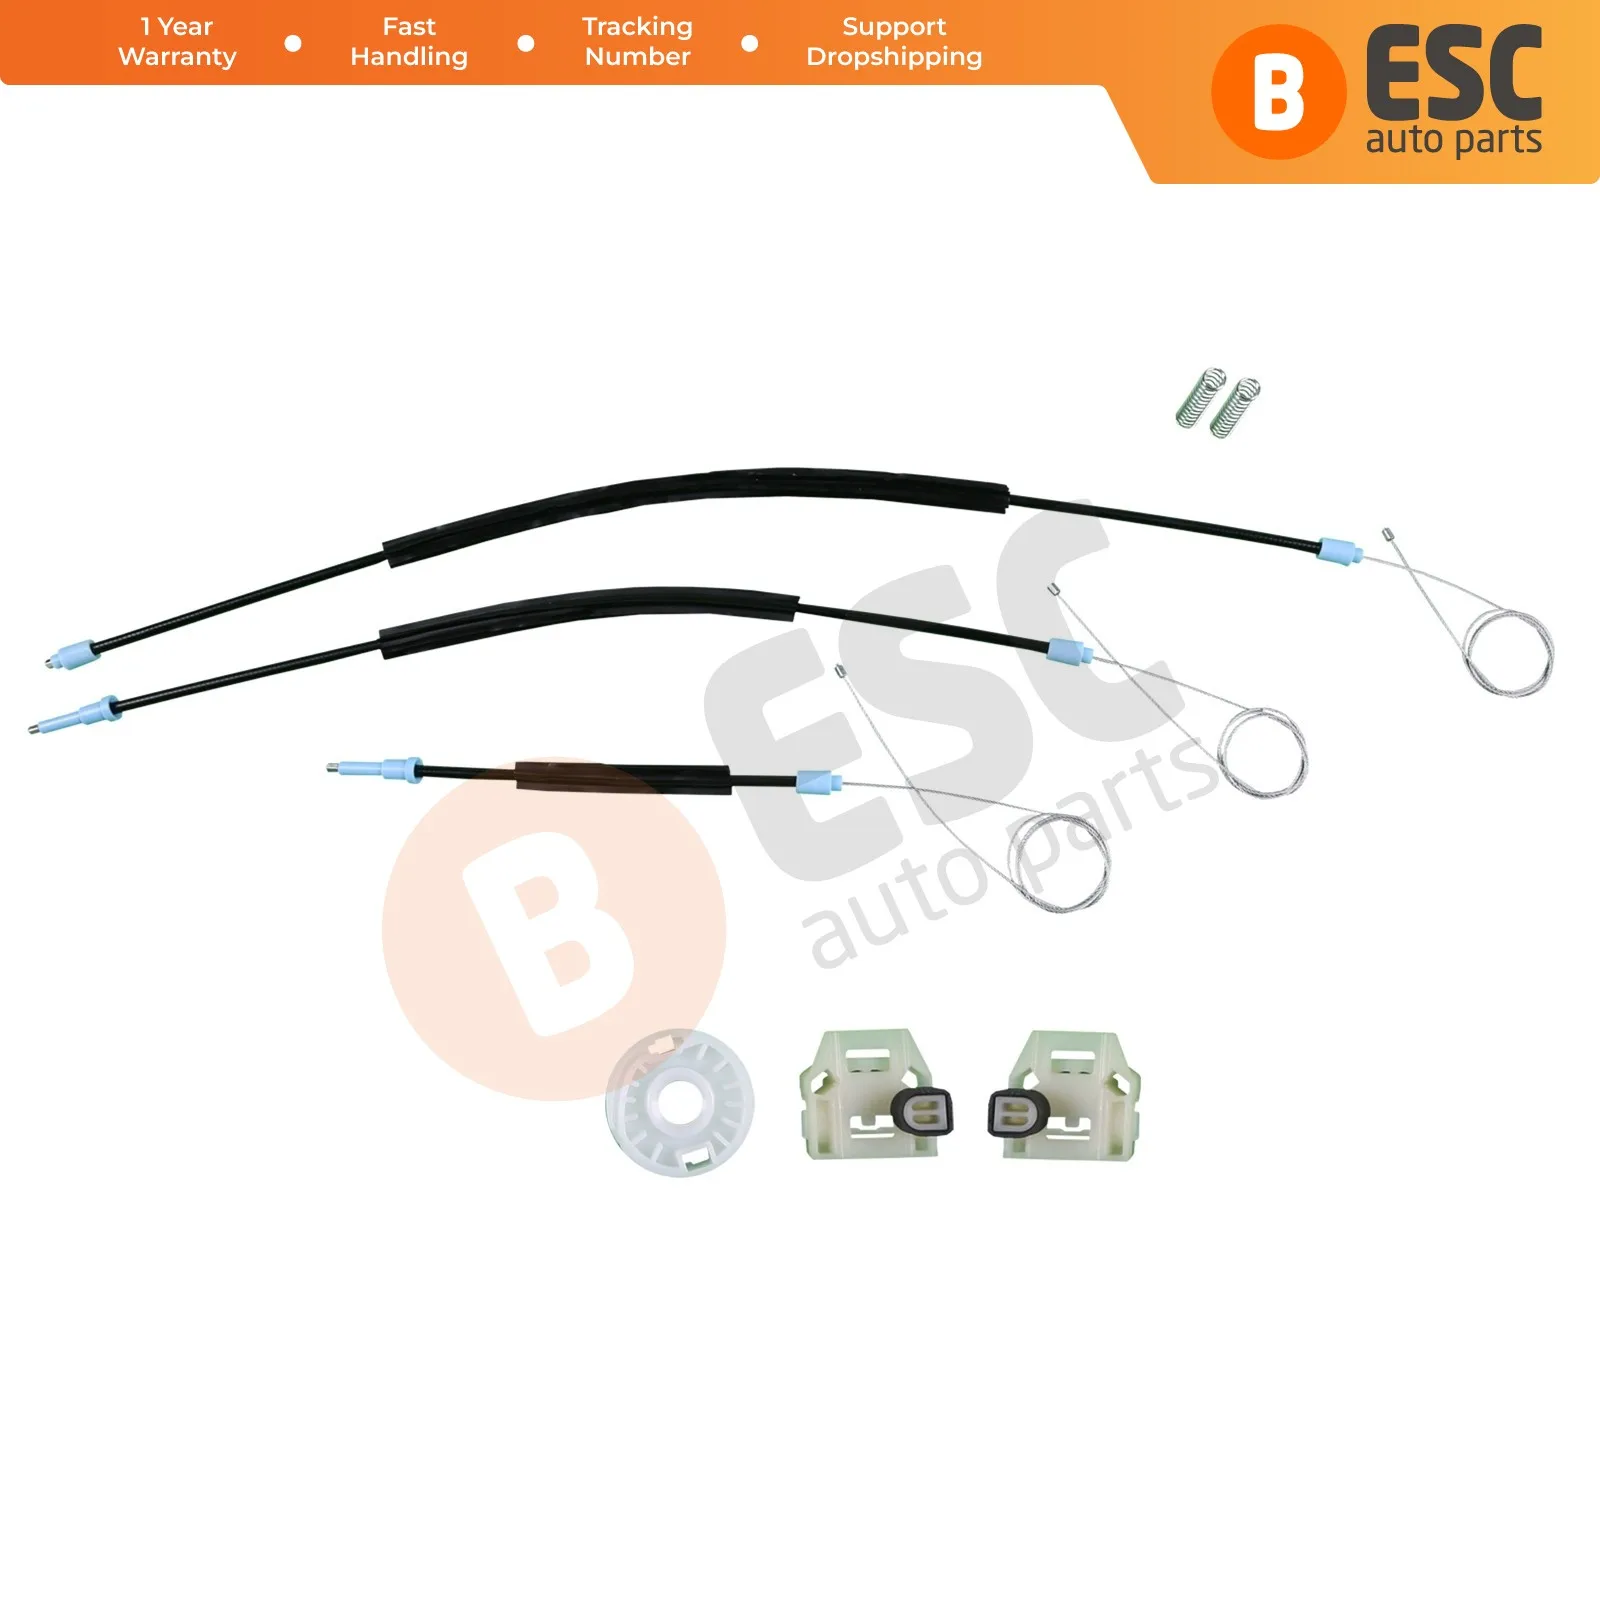 

ESC Auto Parts EWR428 Electrical Power Window Regulator Repair Kit Front Left or Right Door for VW New Beetle 1997-2010